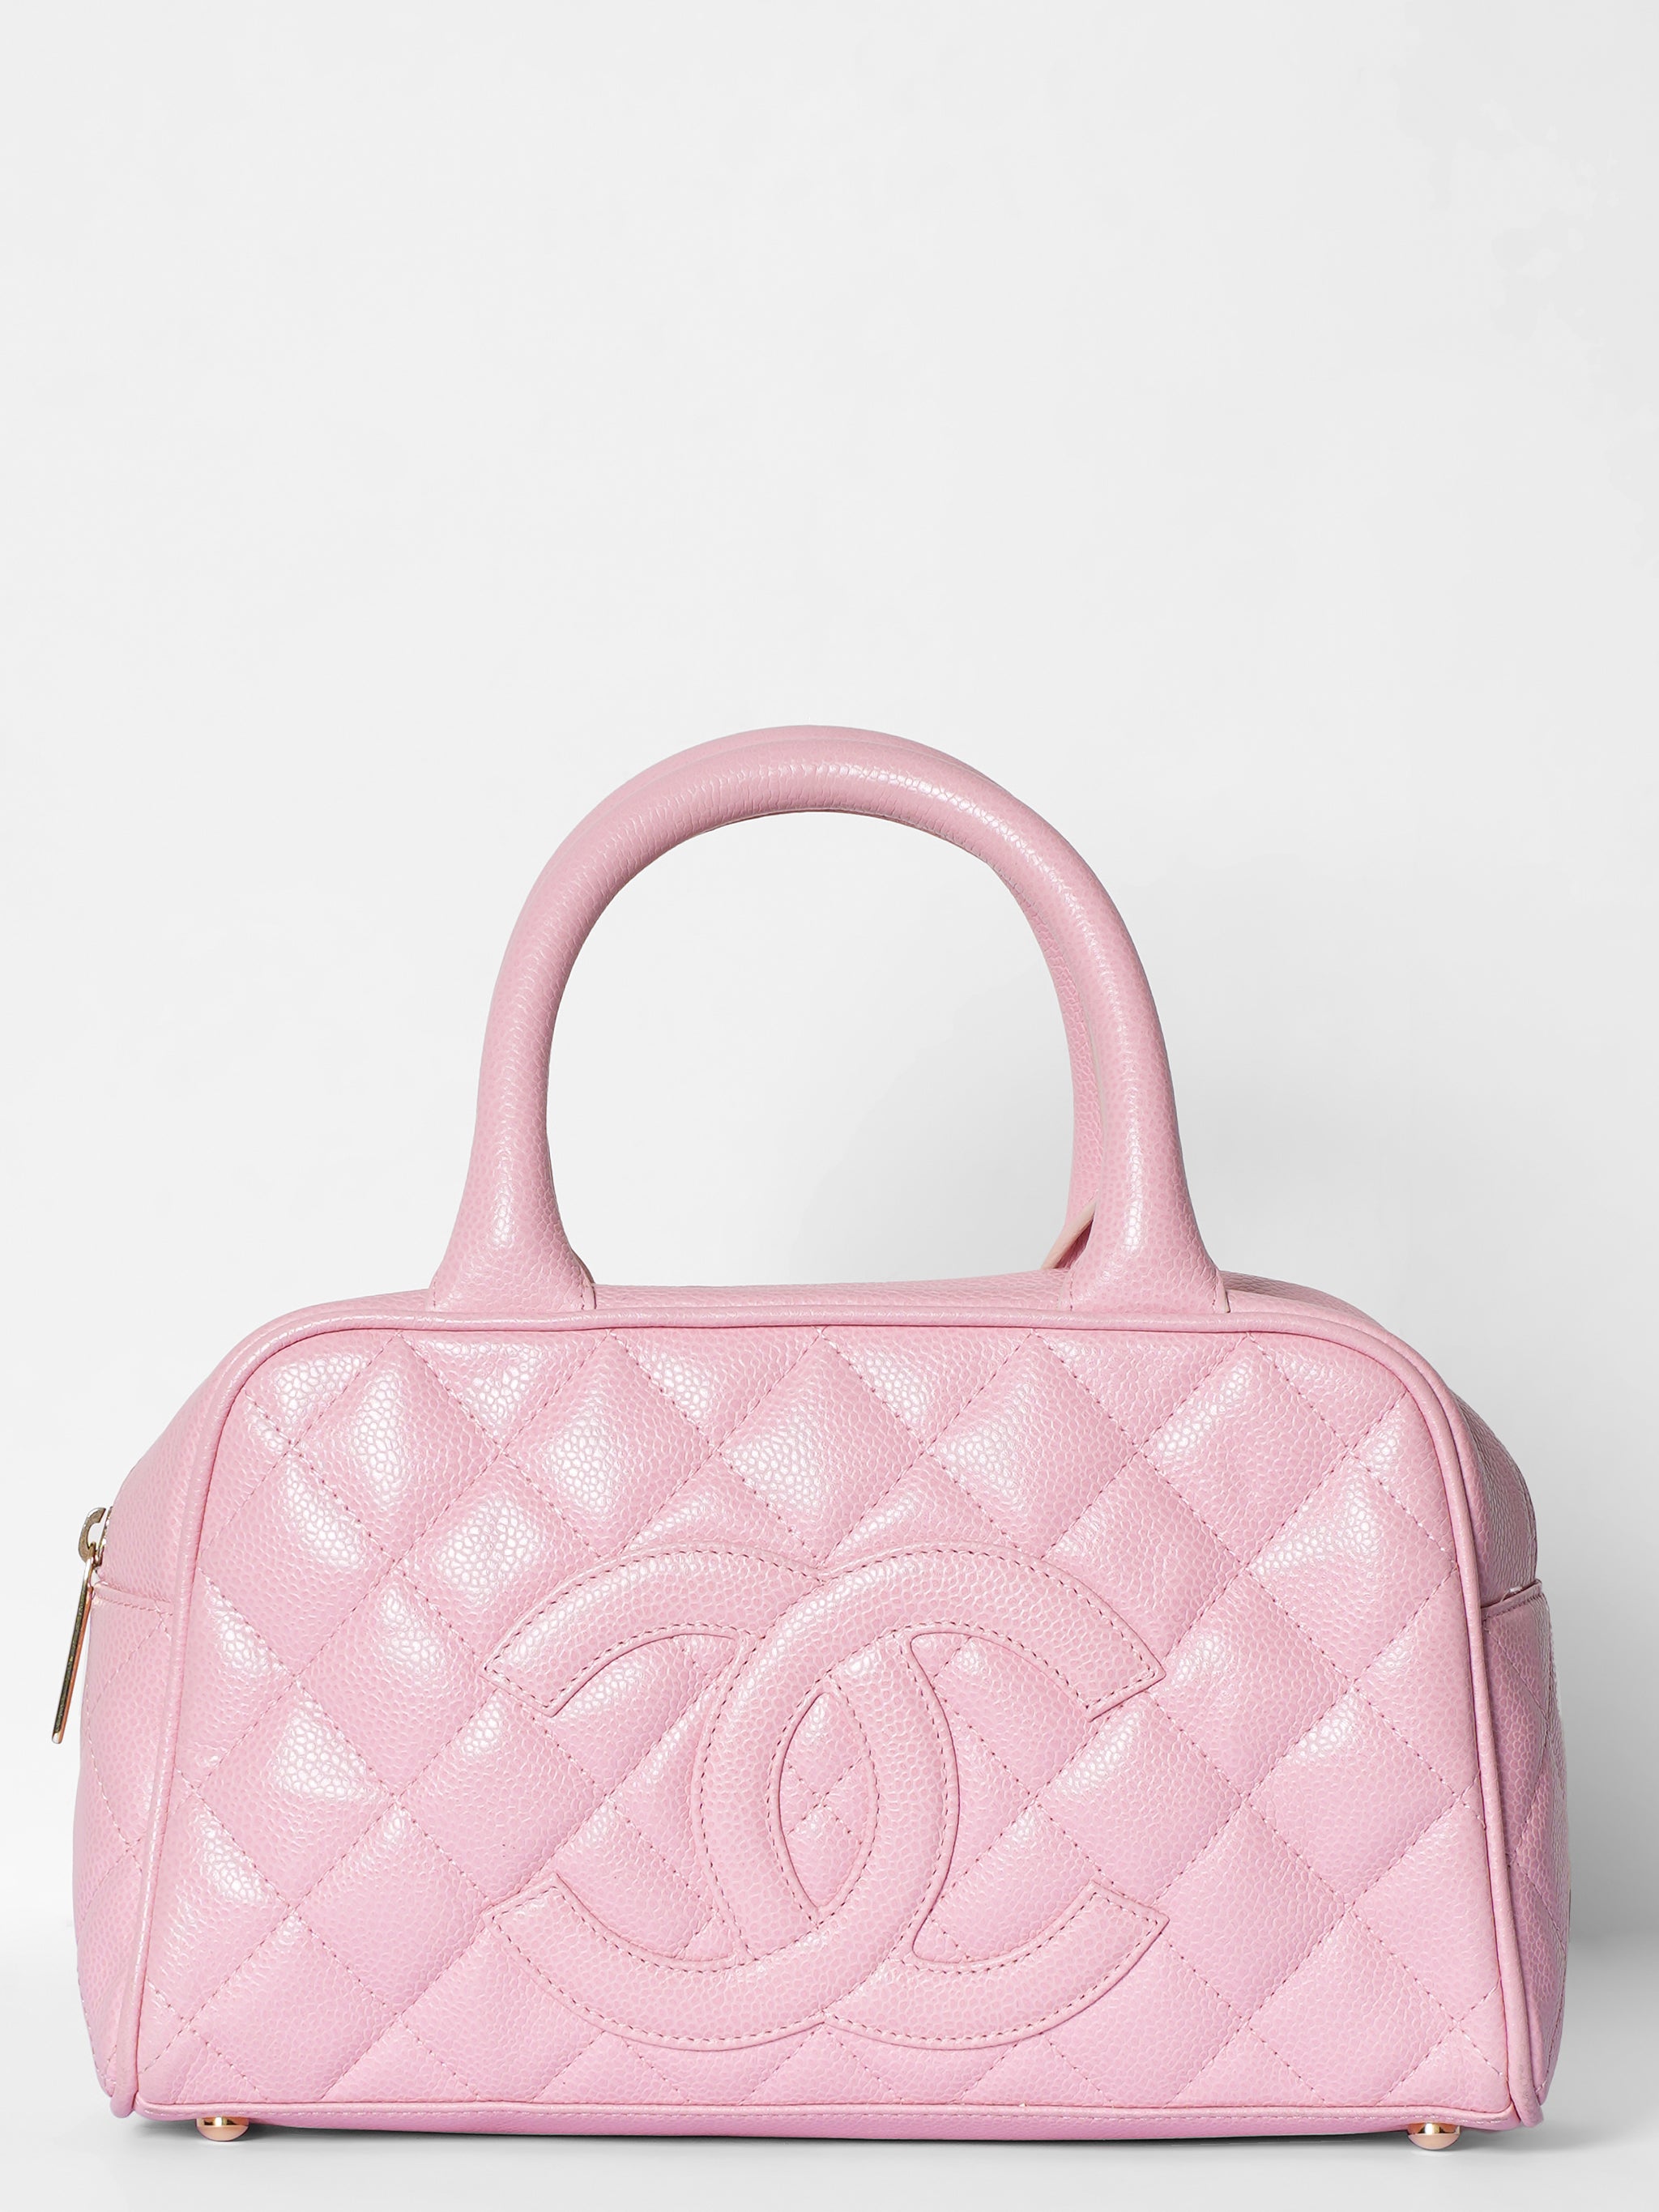 Chanel Pink Quilted Caviar Leather Bowler Bag